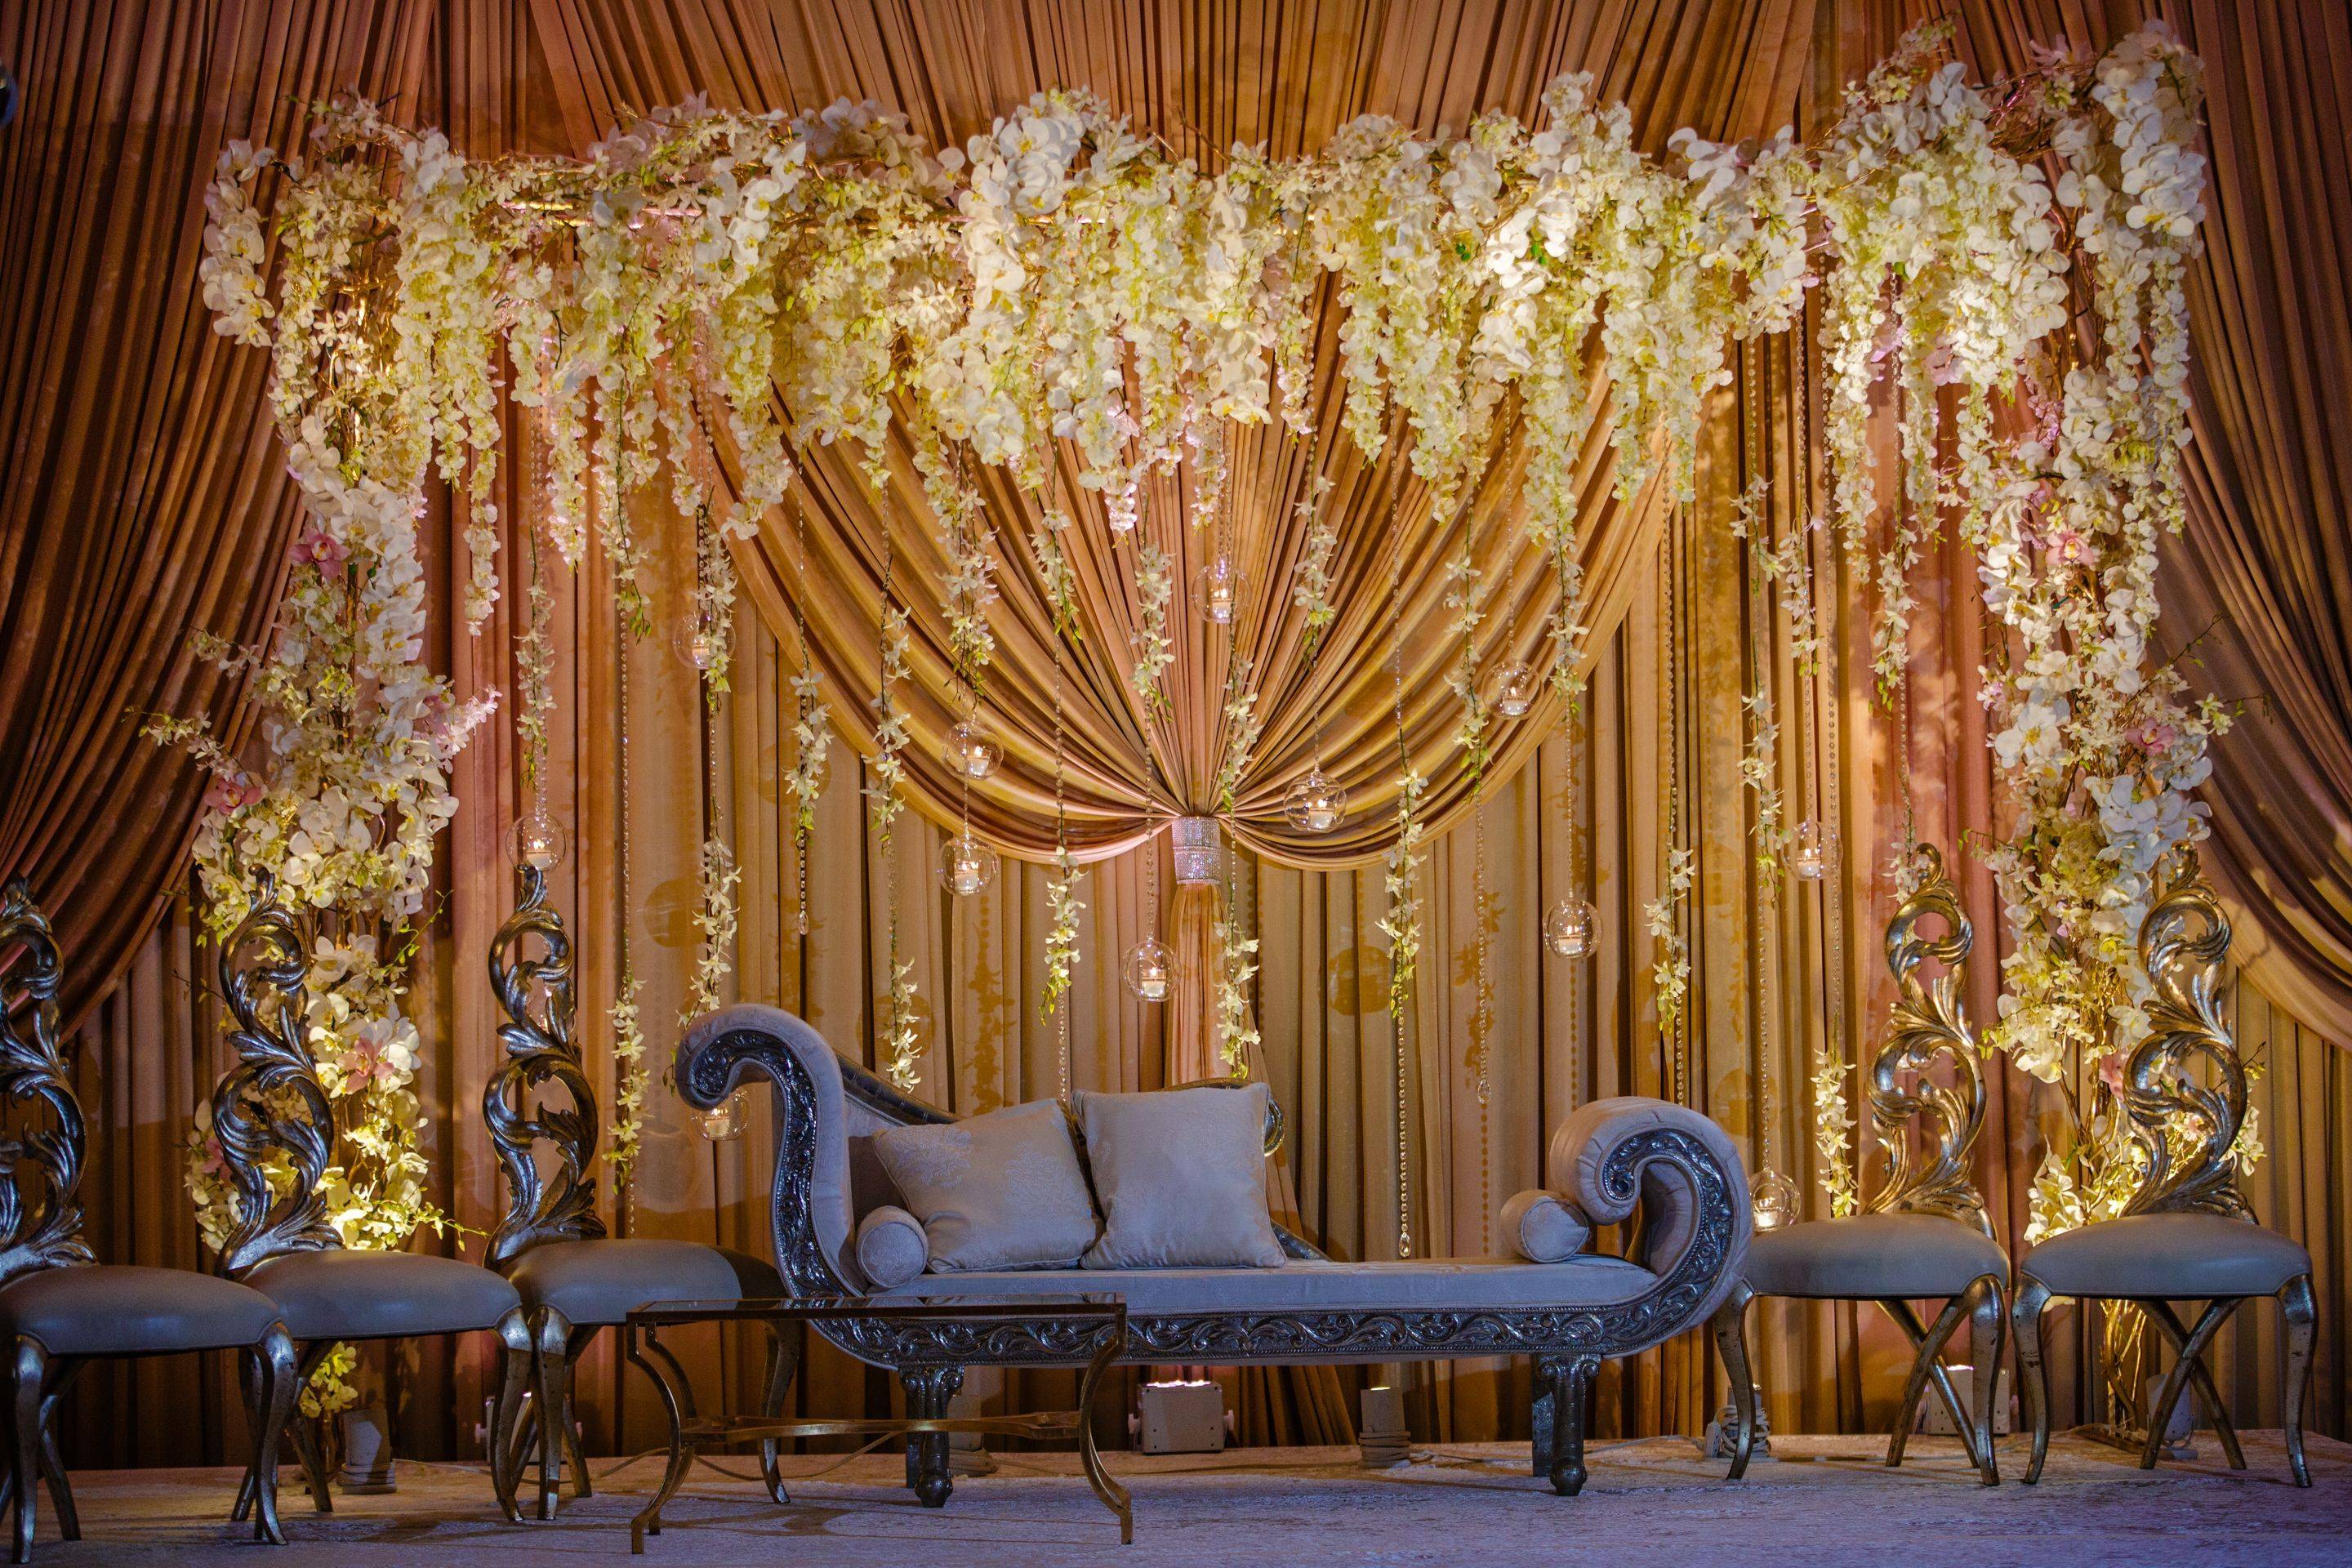 Indian Wedding House Decorations | Home Design